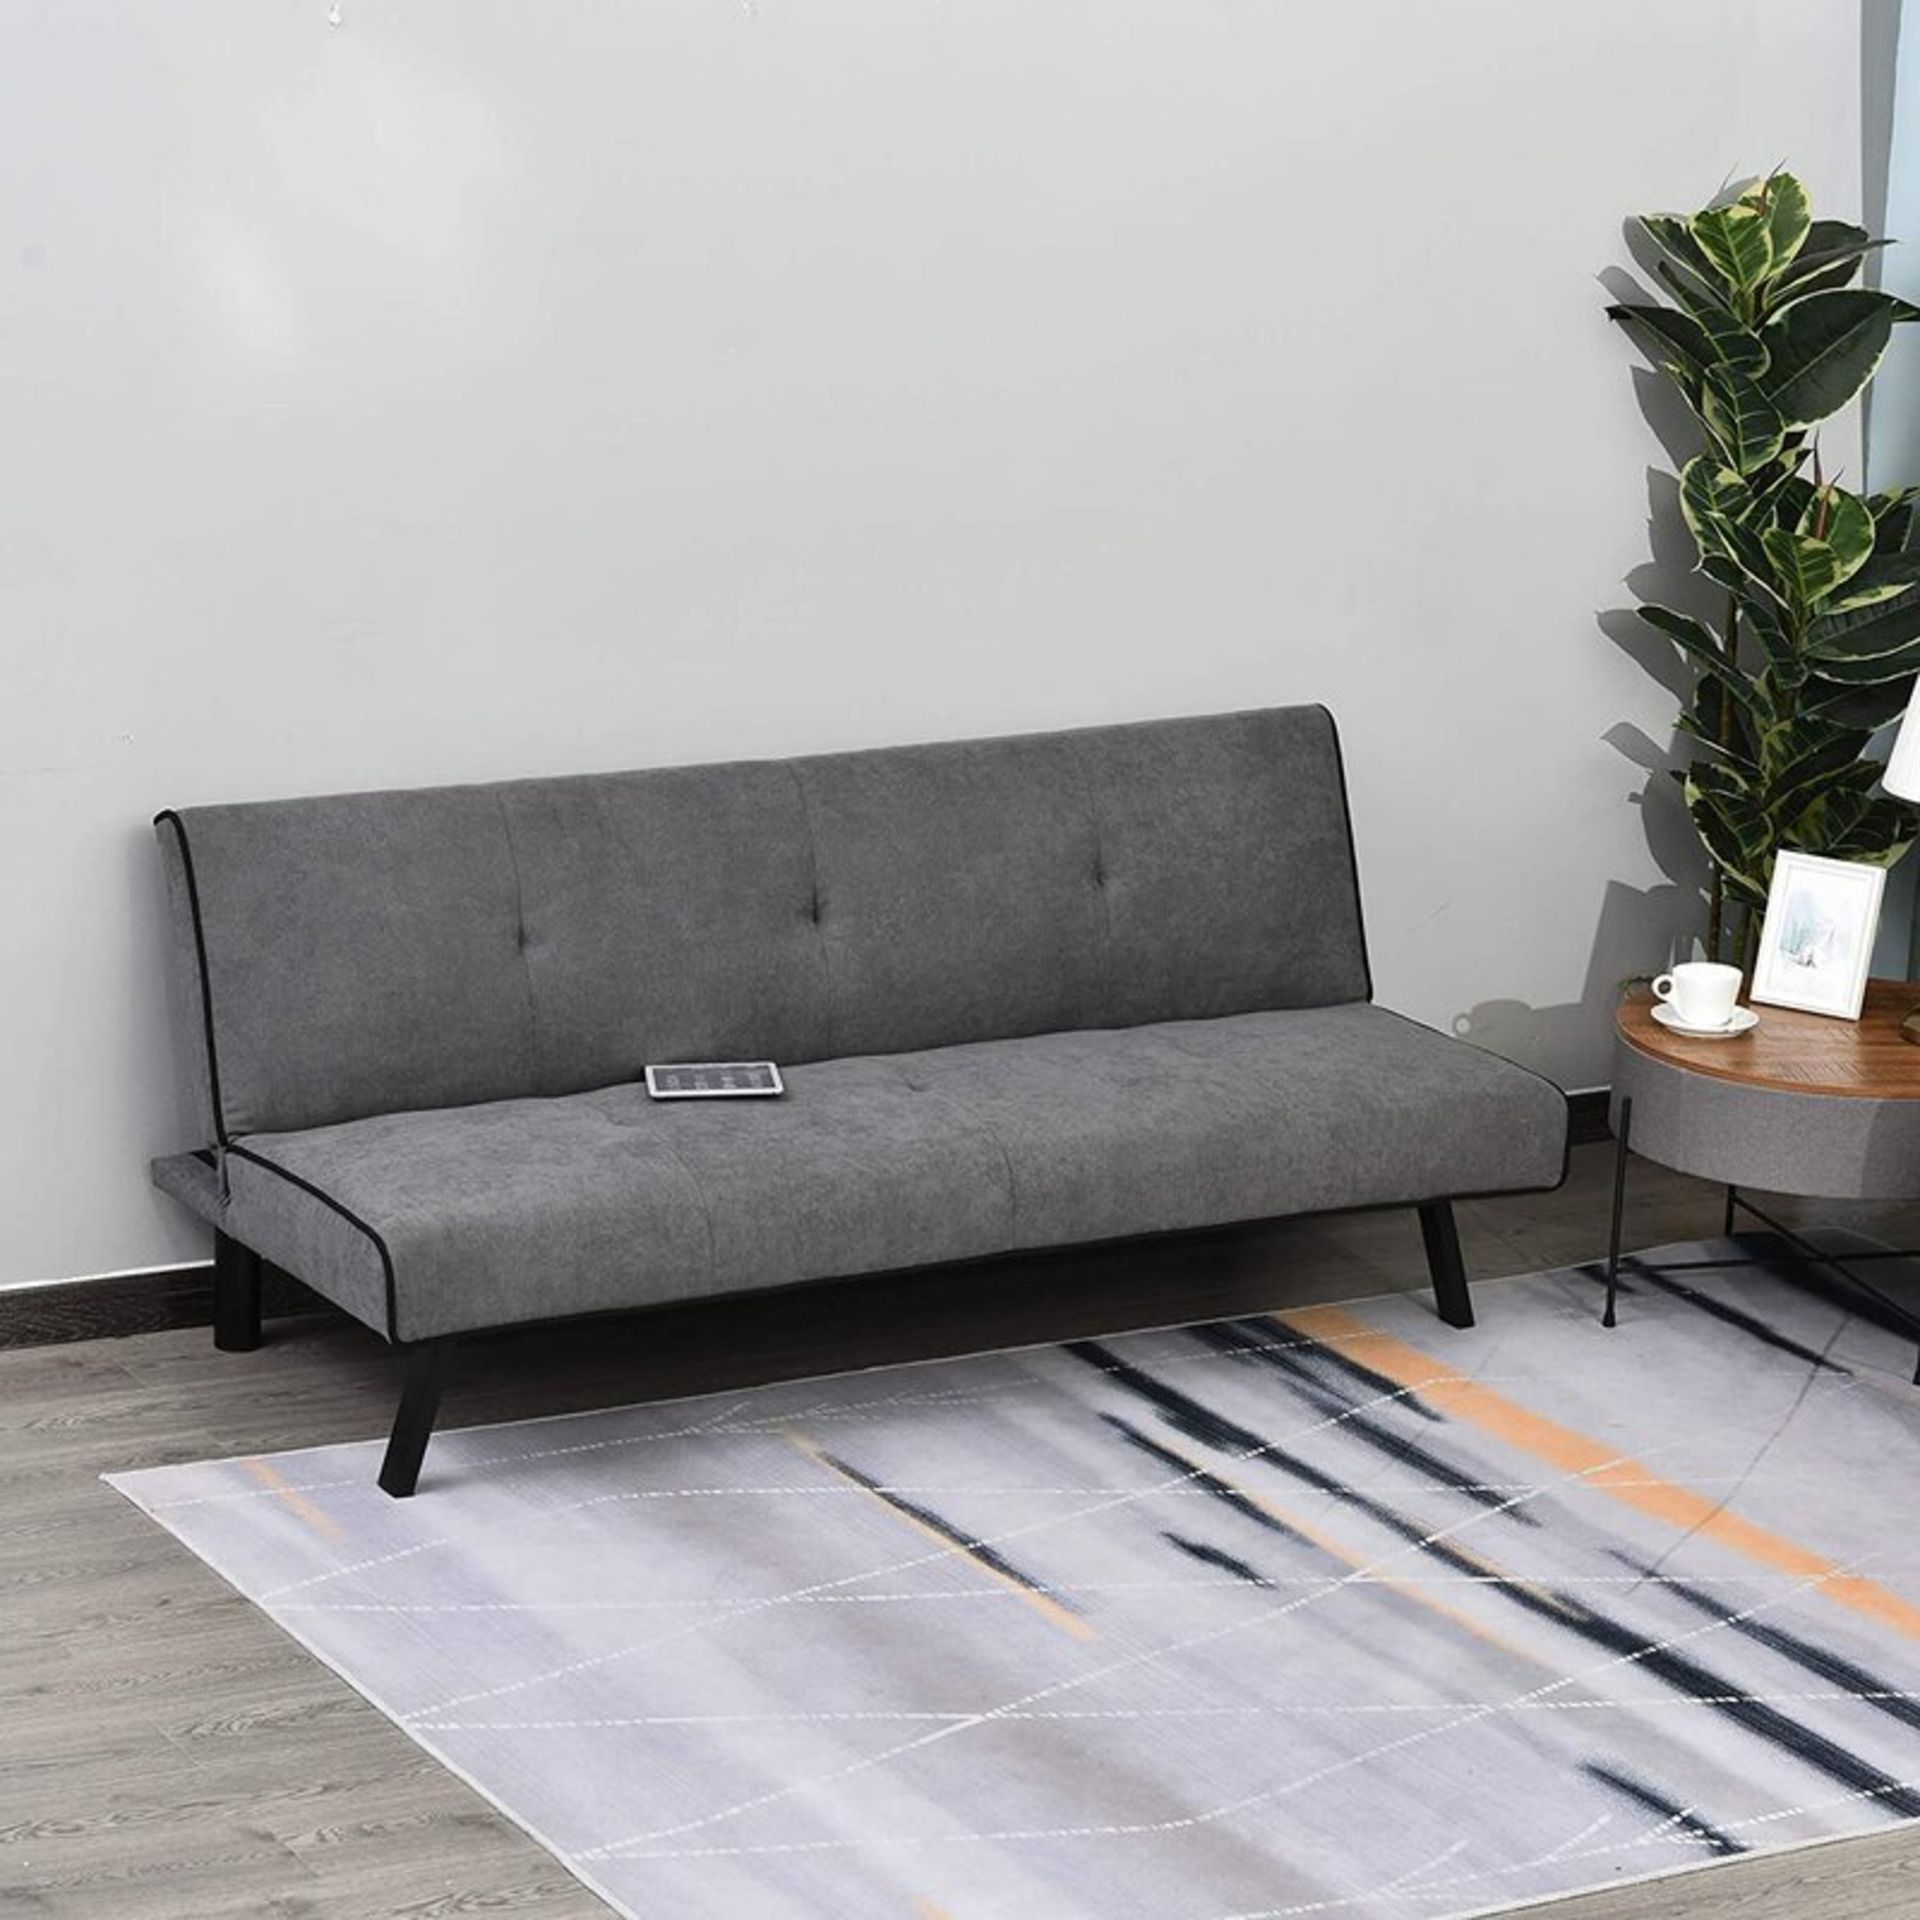 Stali 3 Seater Fold out Sofa Bed - RRP £249.99